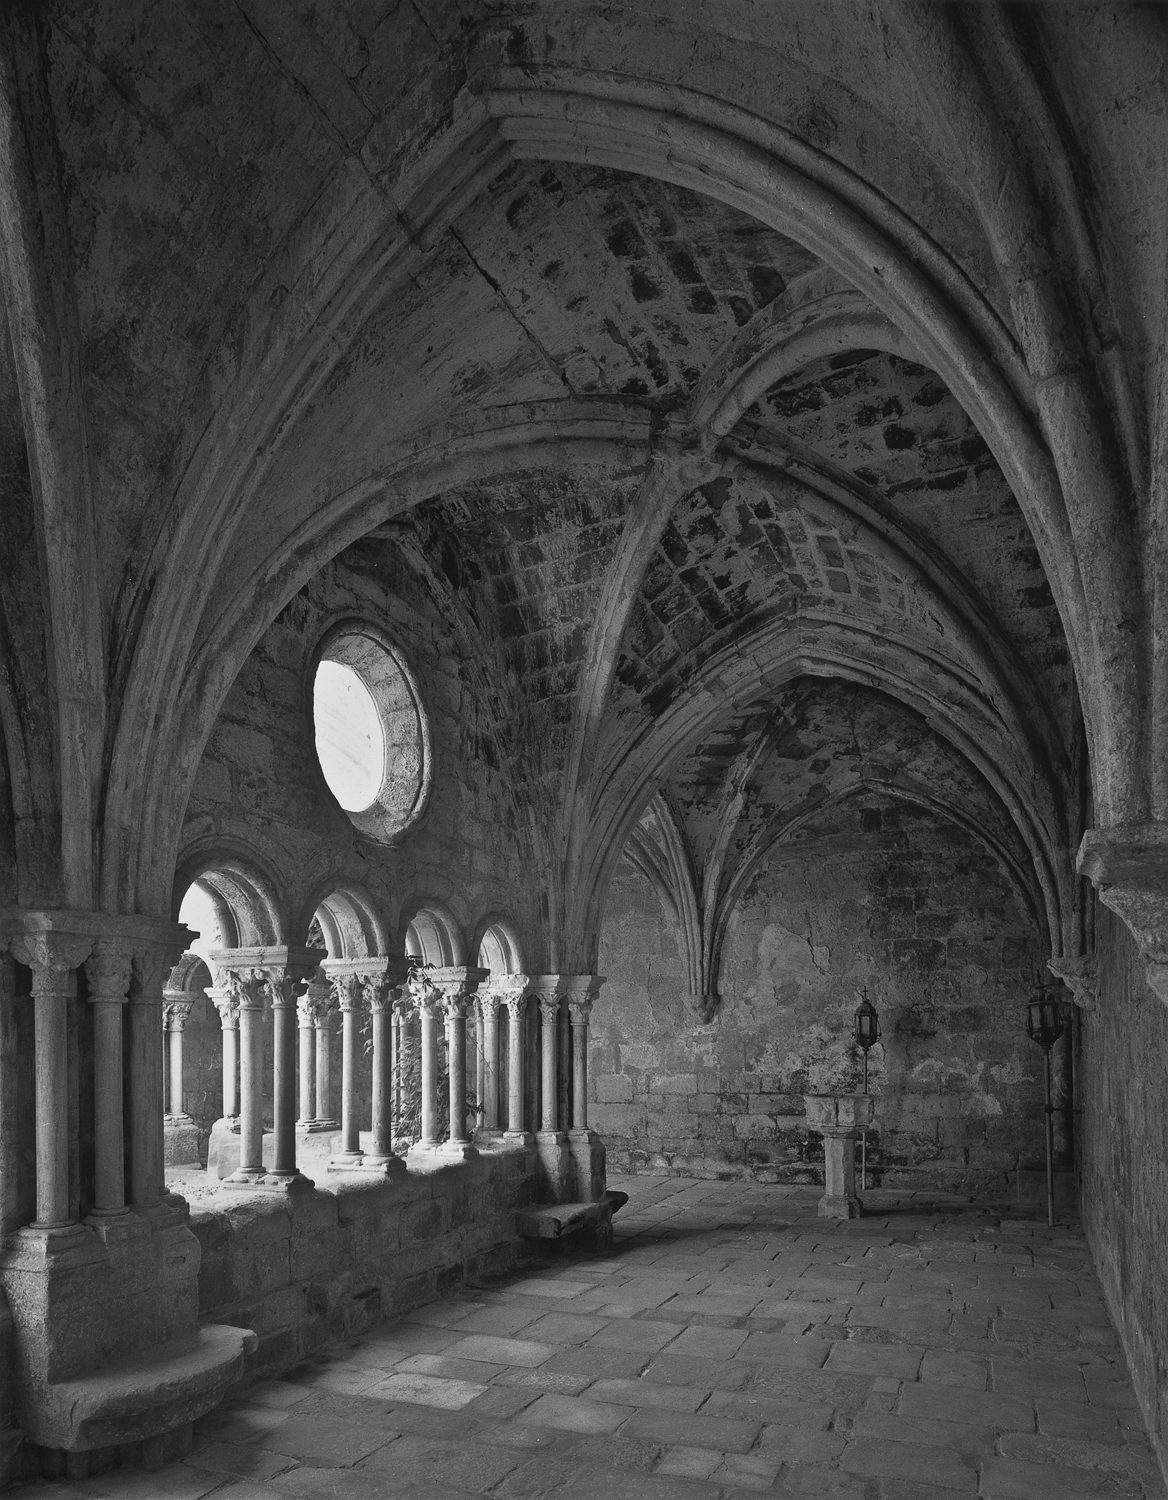 West Cloister Gallery, Fontfroide, 1995